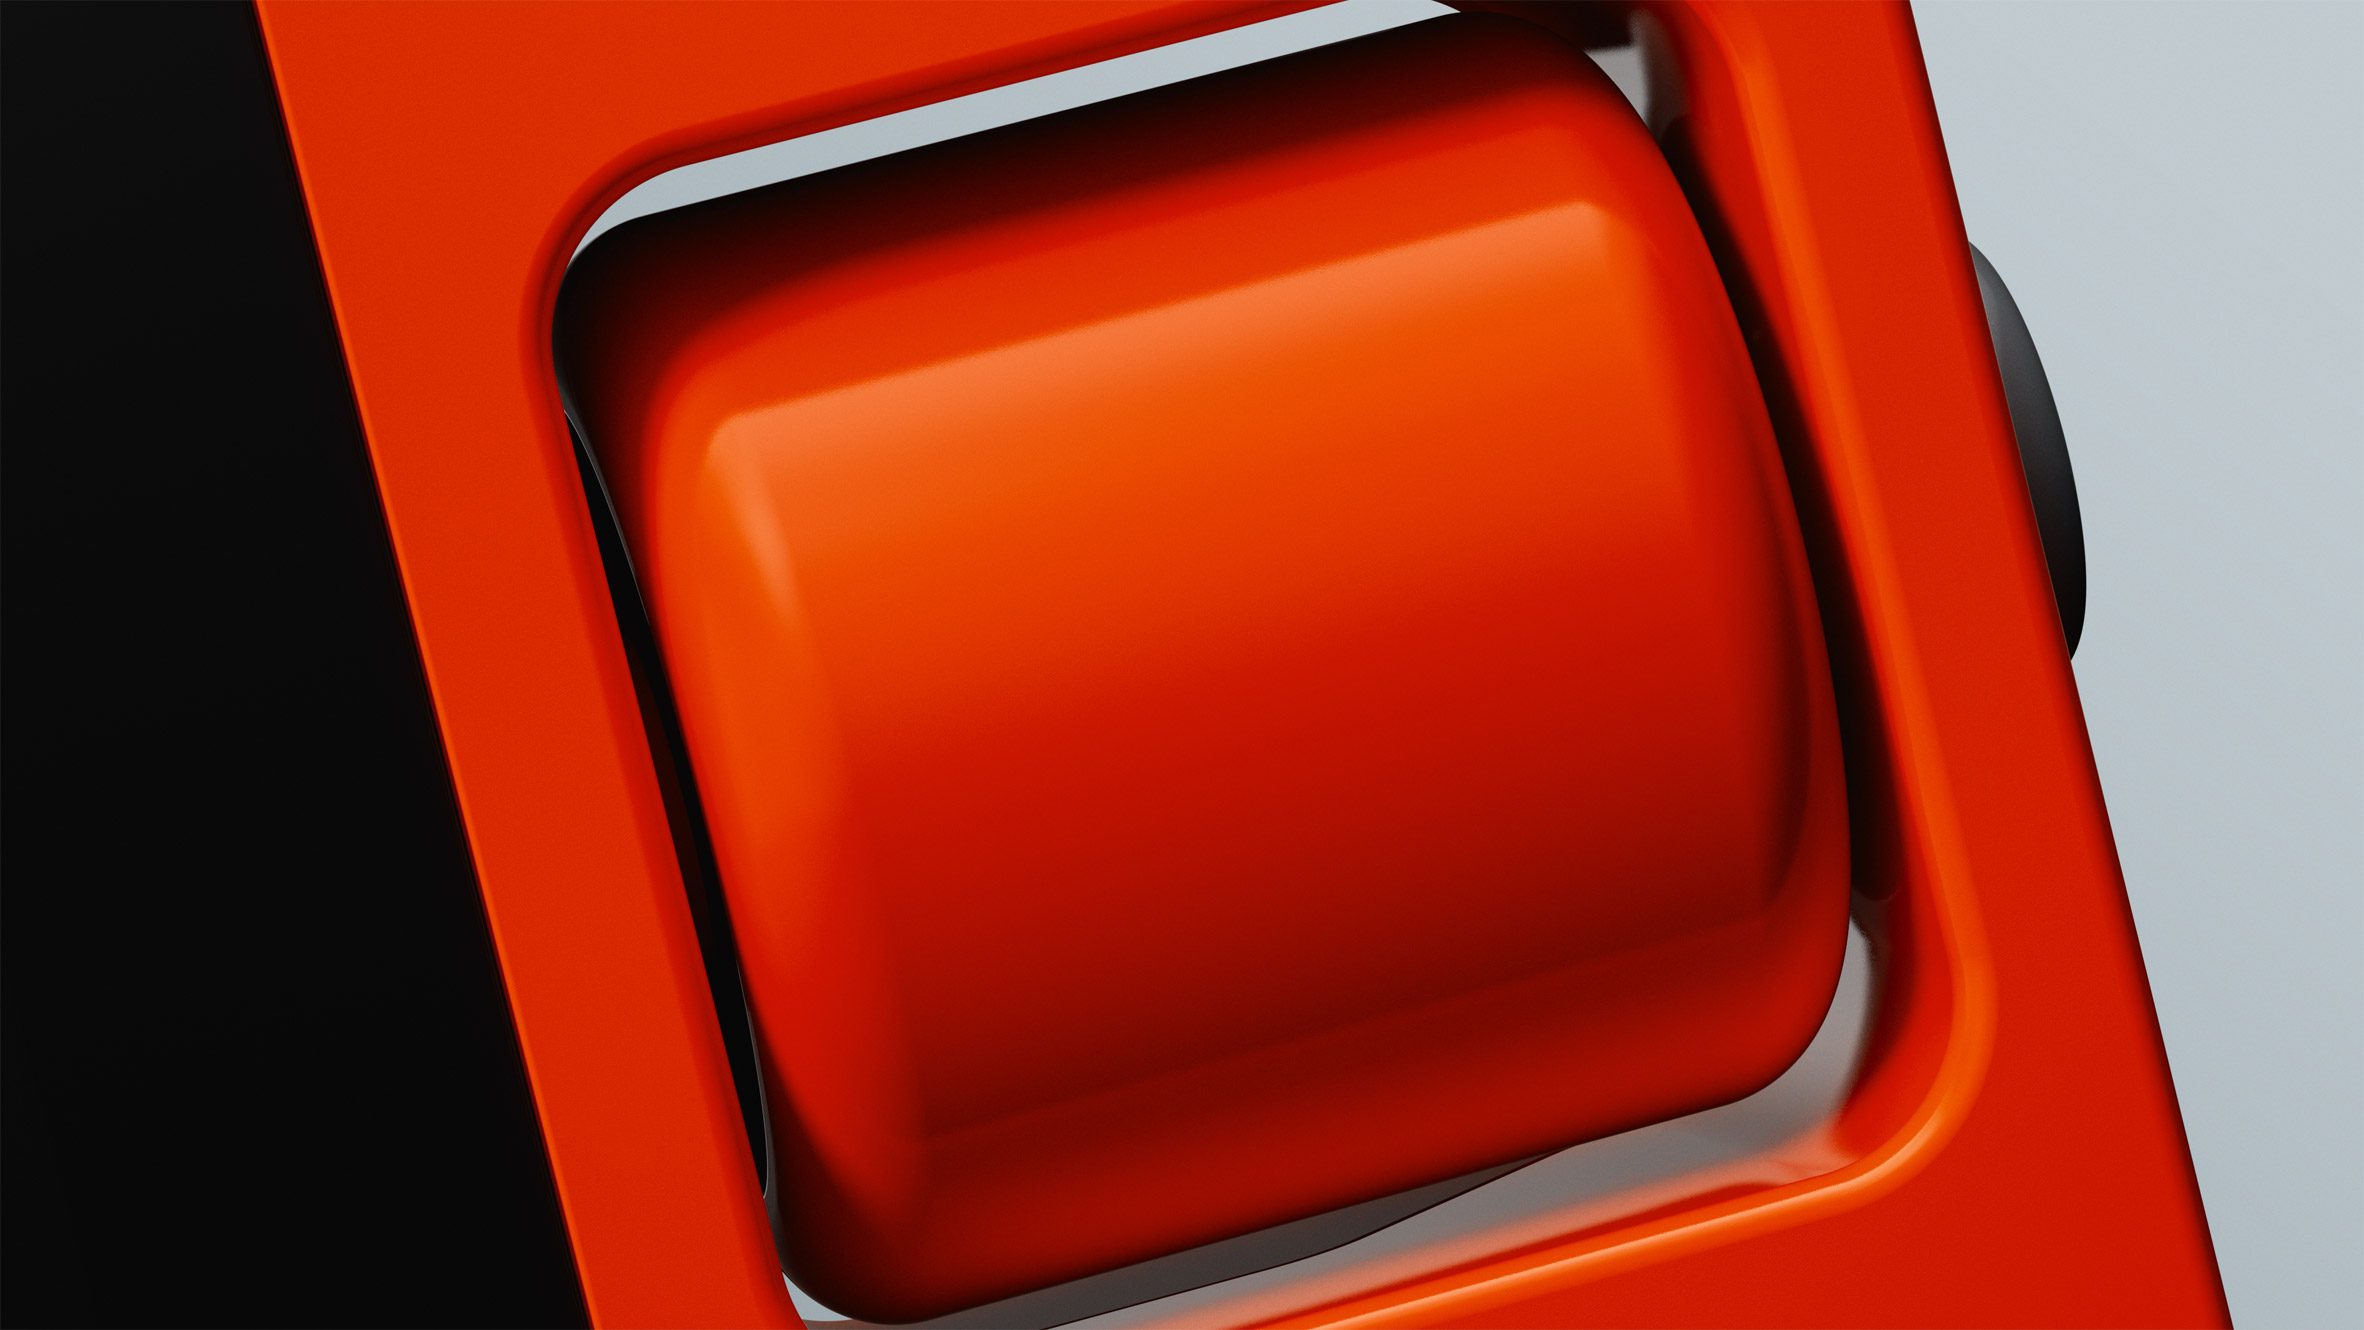 Close-up image of a scroll wheel on a bright orange gadget